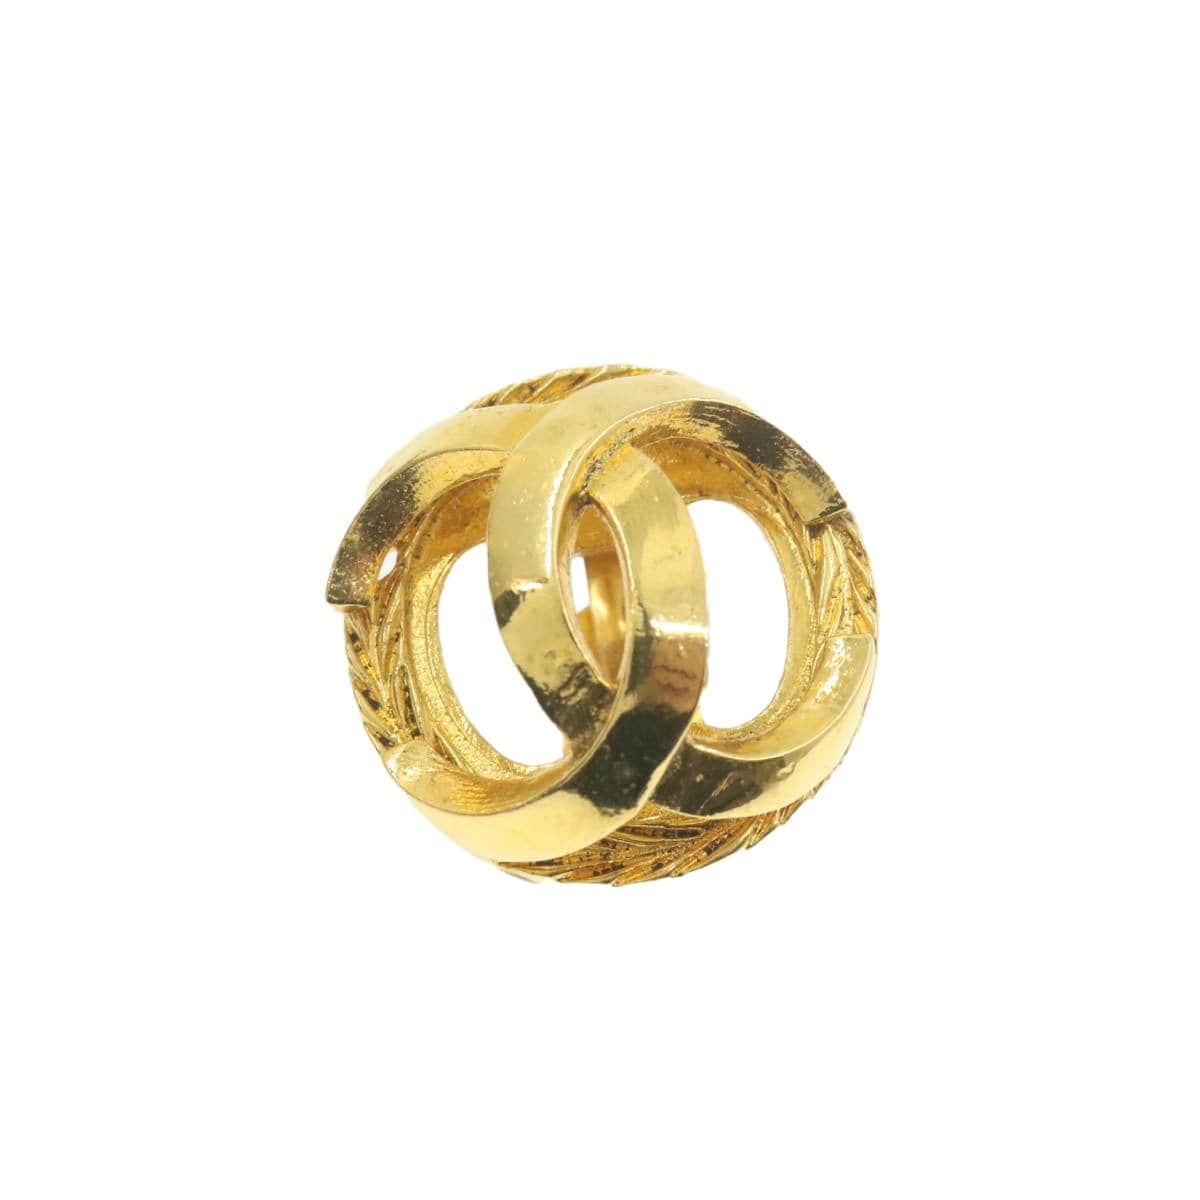 Chanel CHANEL CC Logo Clip on Earring Gold Tone Auth br212